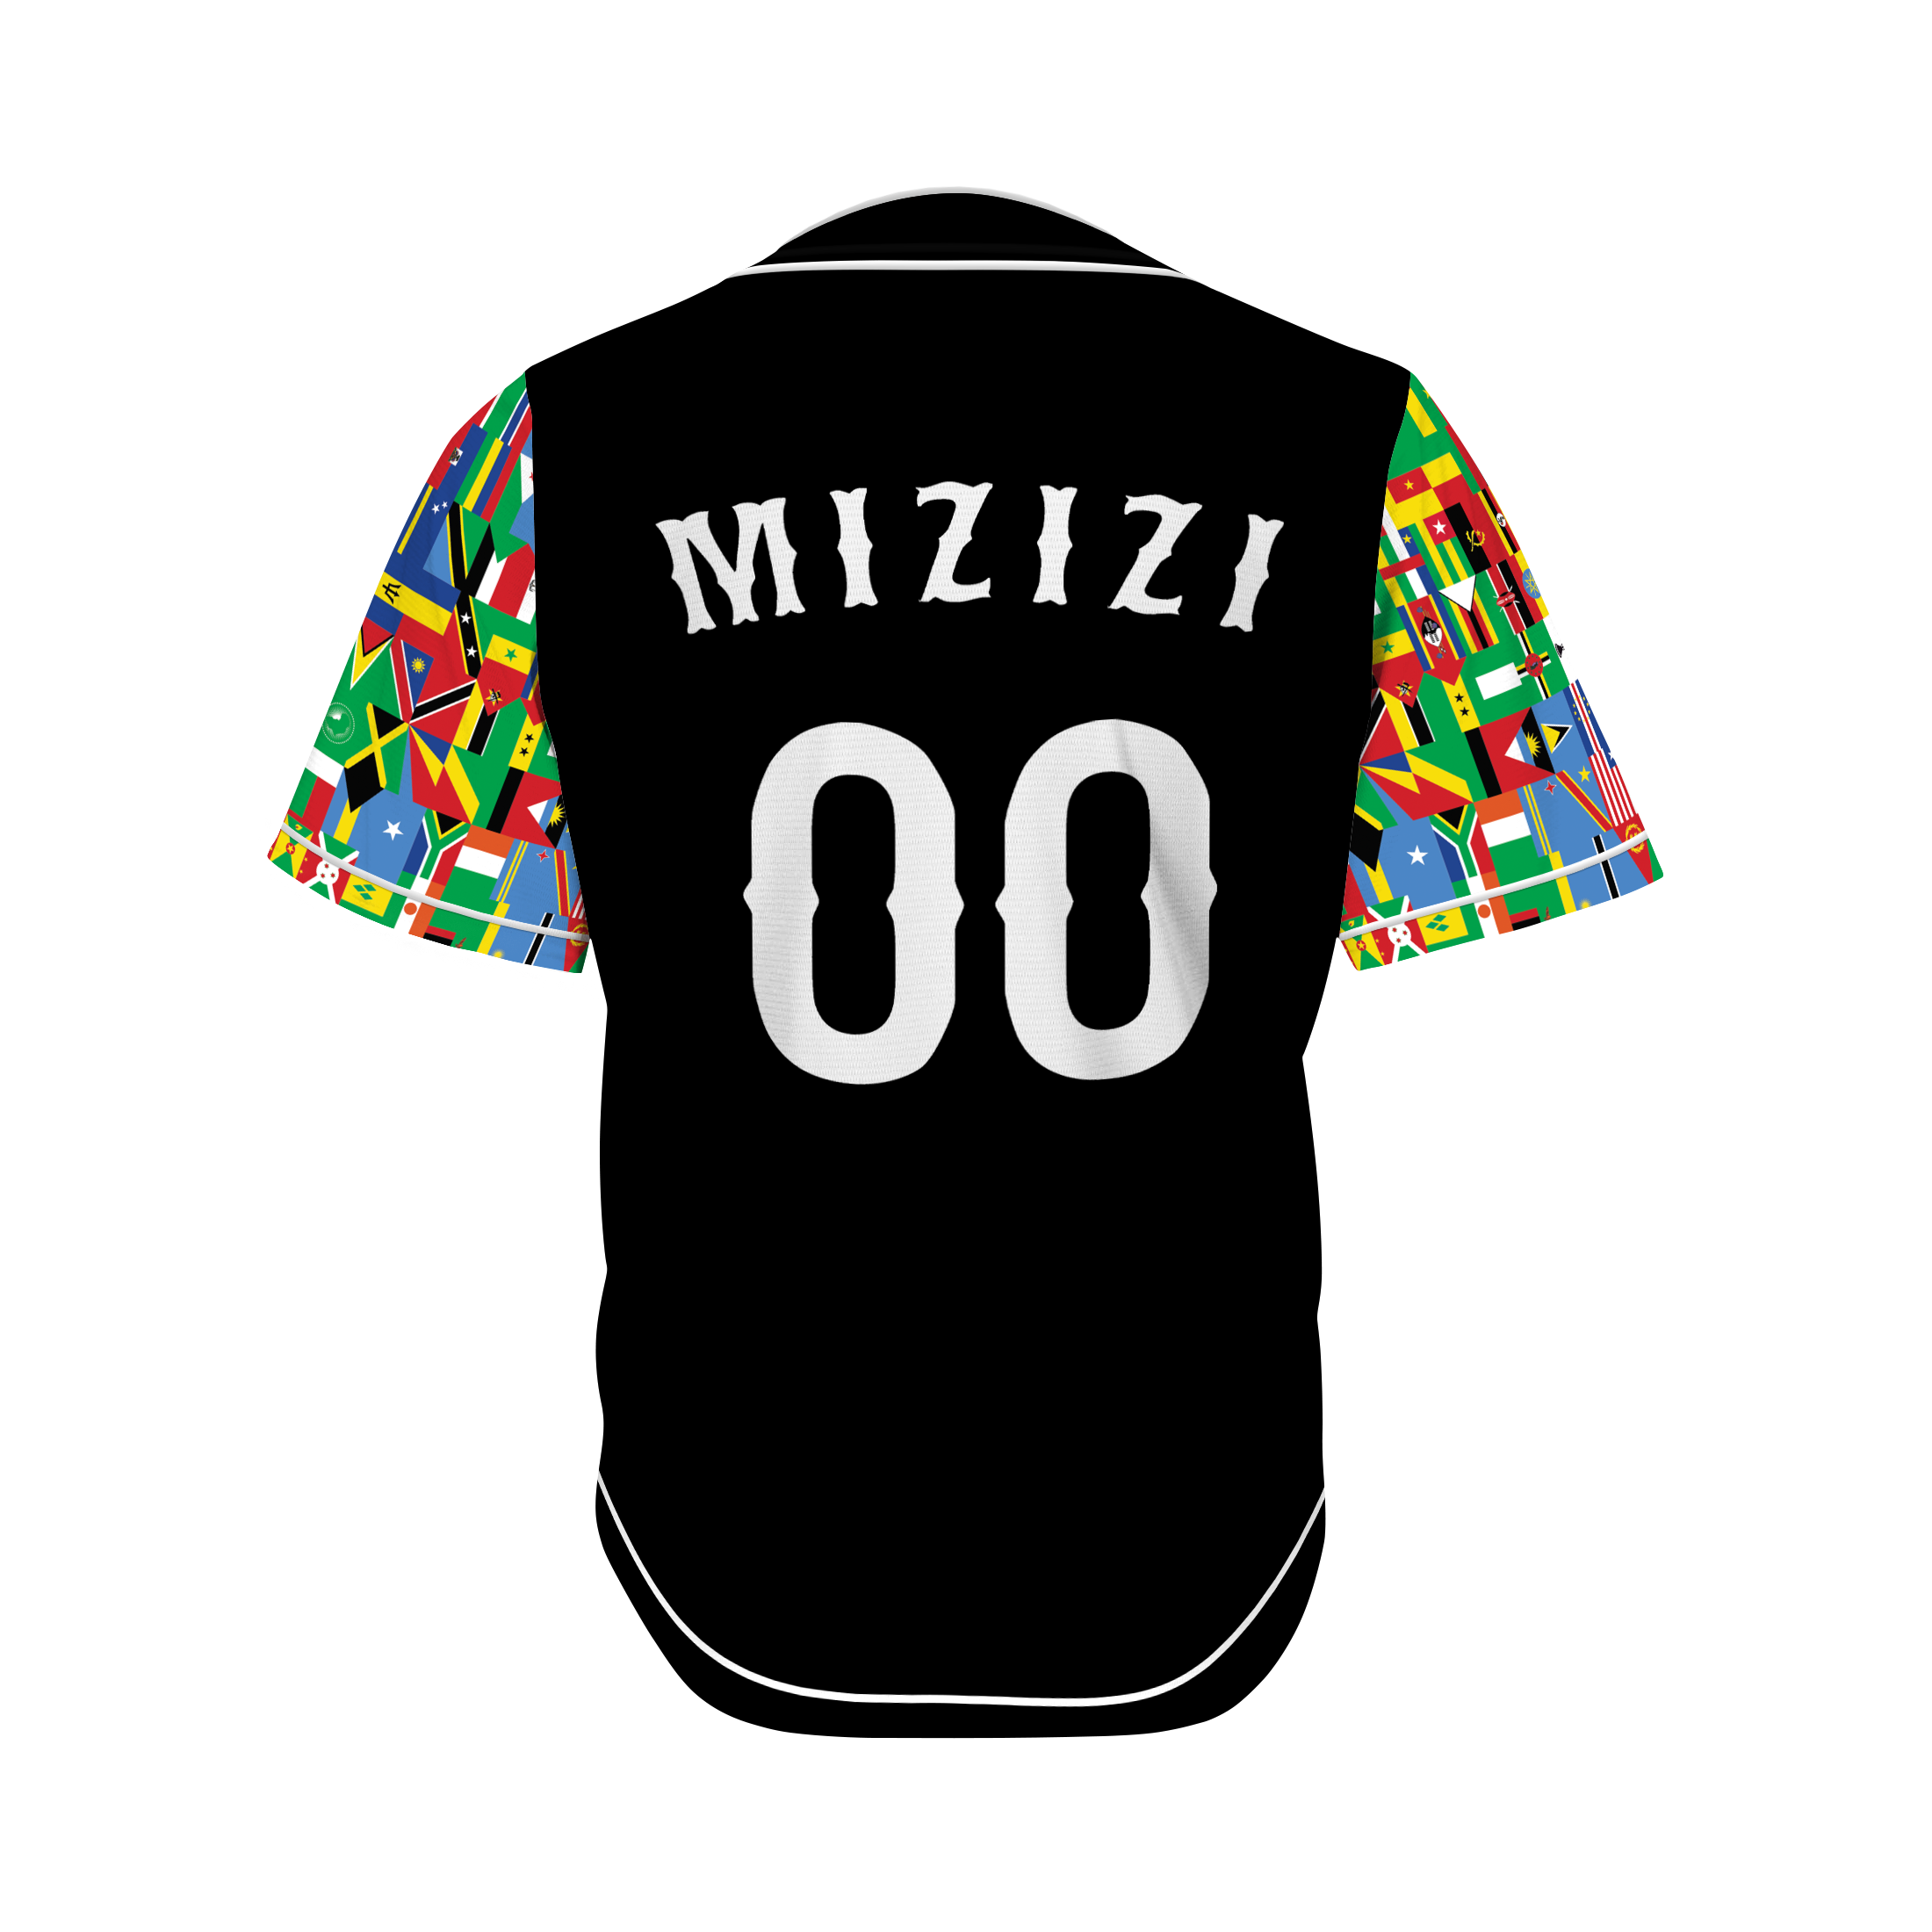 Japan Baseball Jersey Store on X: Order has been shipped to